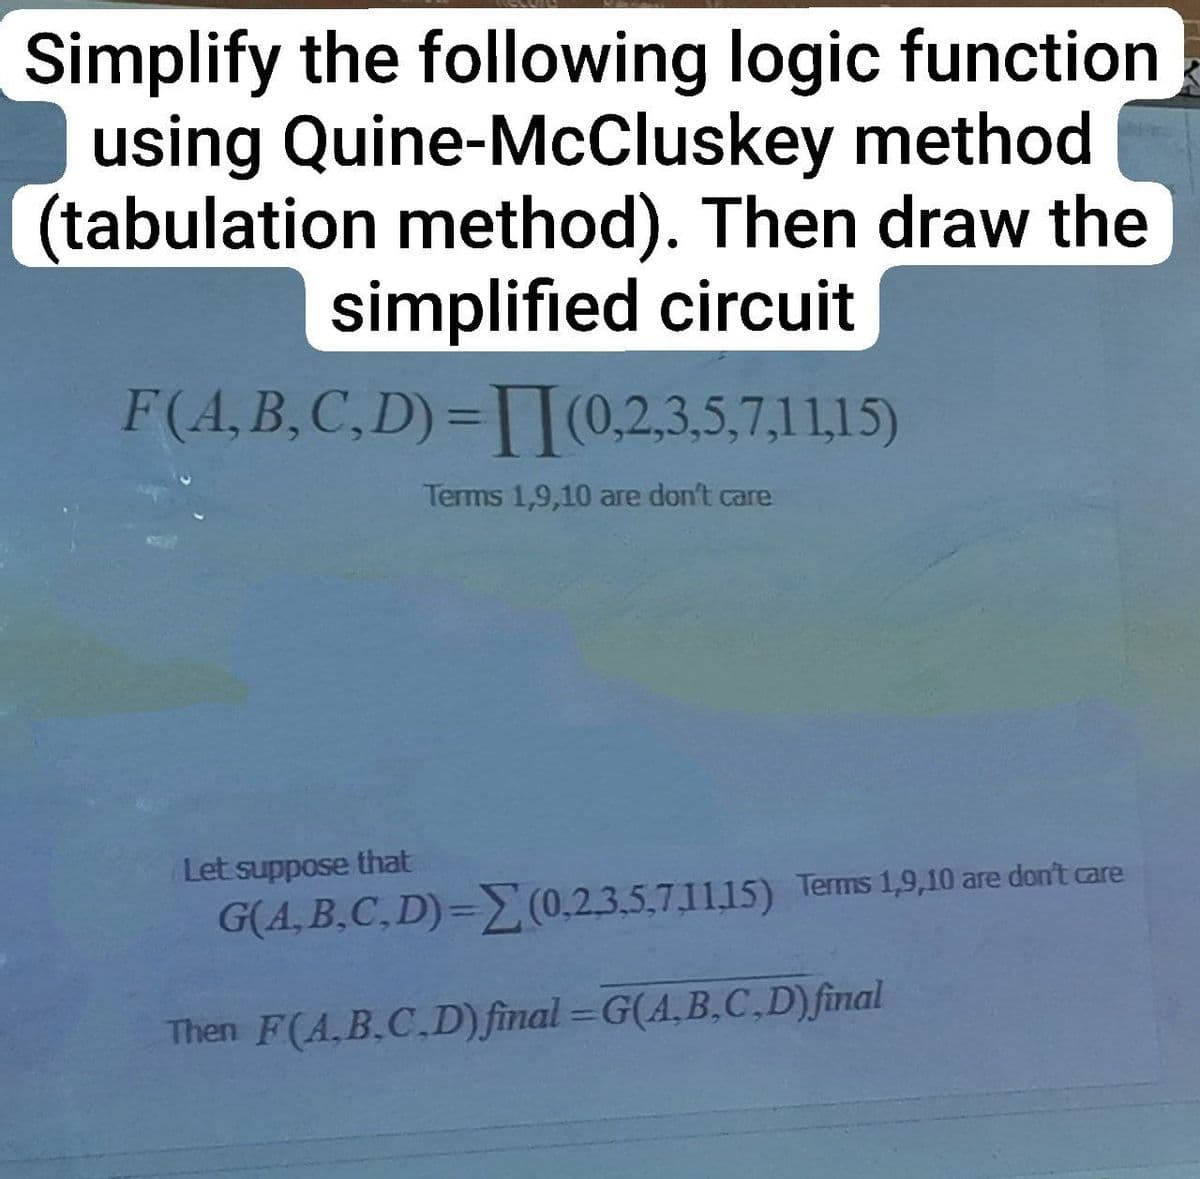 Simplify the following logic function
using Quine-McCluskey method
(tabulation method). Then draw the
simplified circuit
F(A,B,C,D)=(0,2,3,5,7,11,15)
Let suppose that
Terms 1,9,10 are don't care
G(A,B,C,D)=(0,2,3,5,7,1115) Terms 1,9,10 are don't care
Then F(A,B,C,D) final=G(A,B,C,D) final